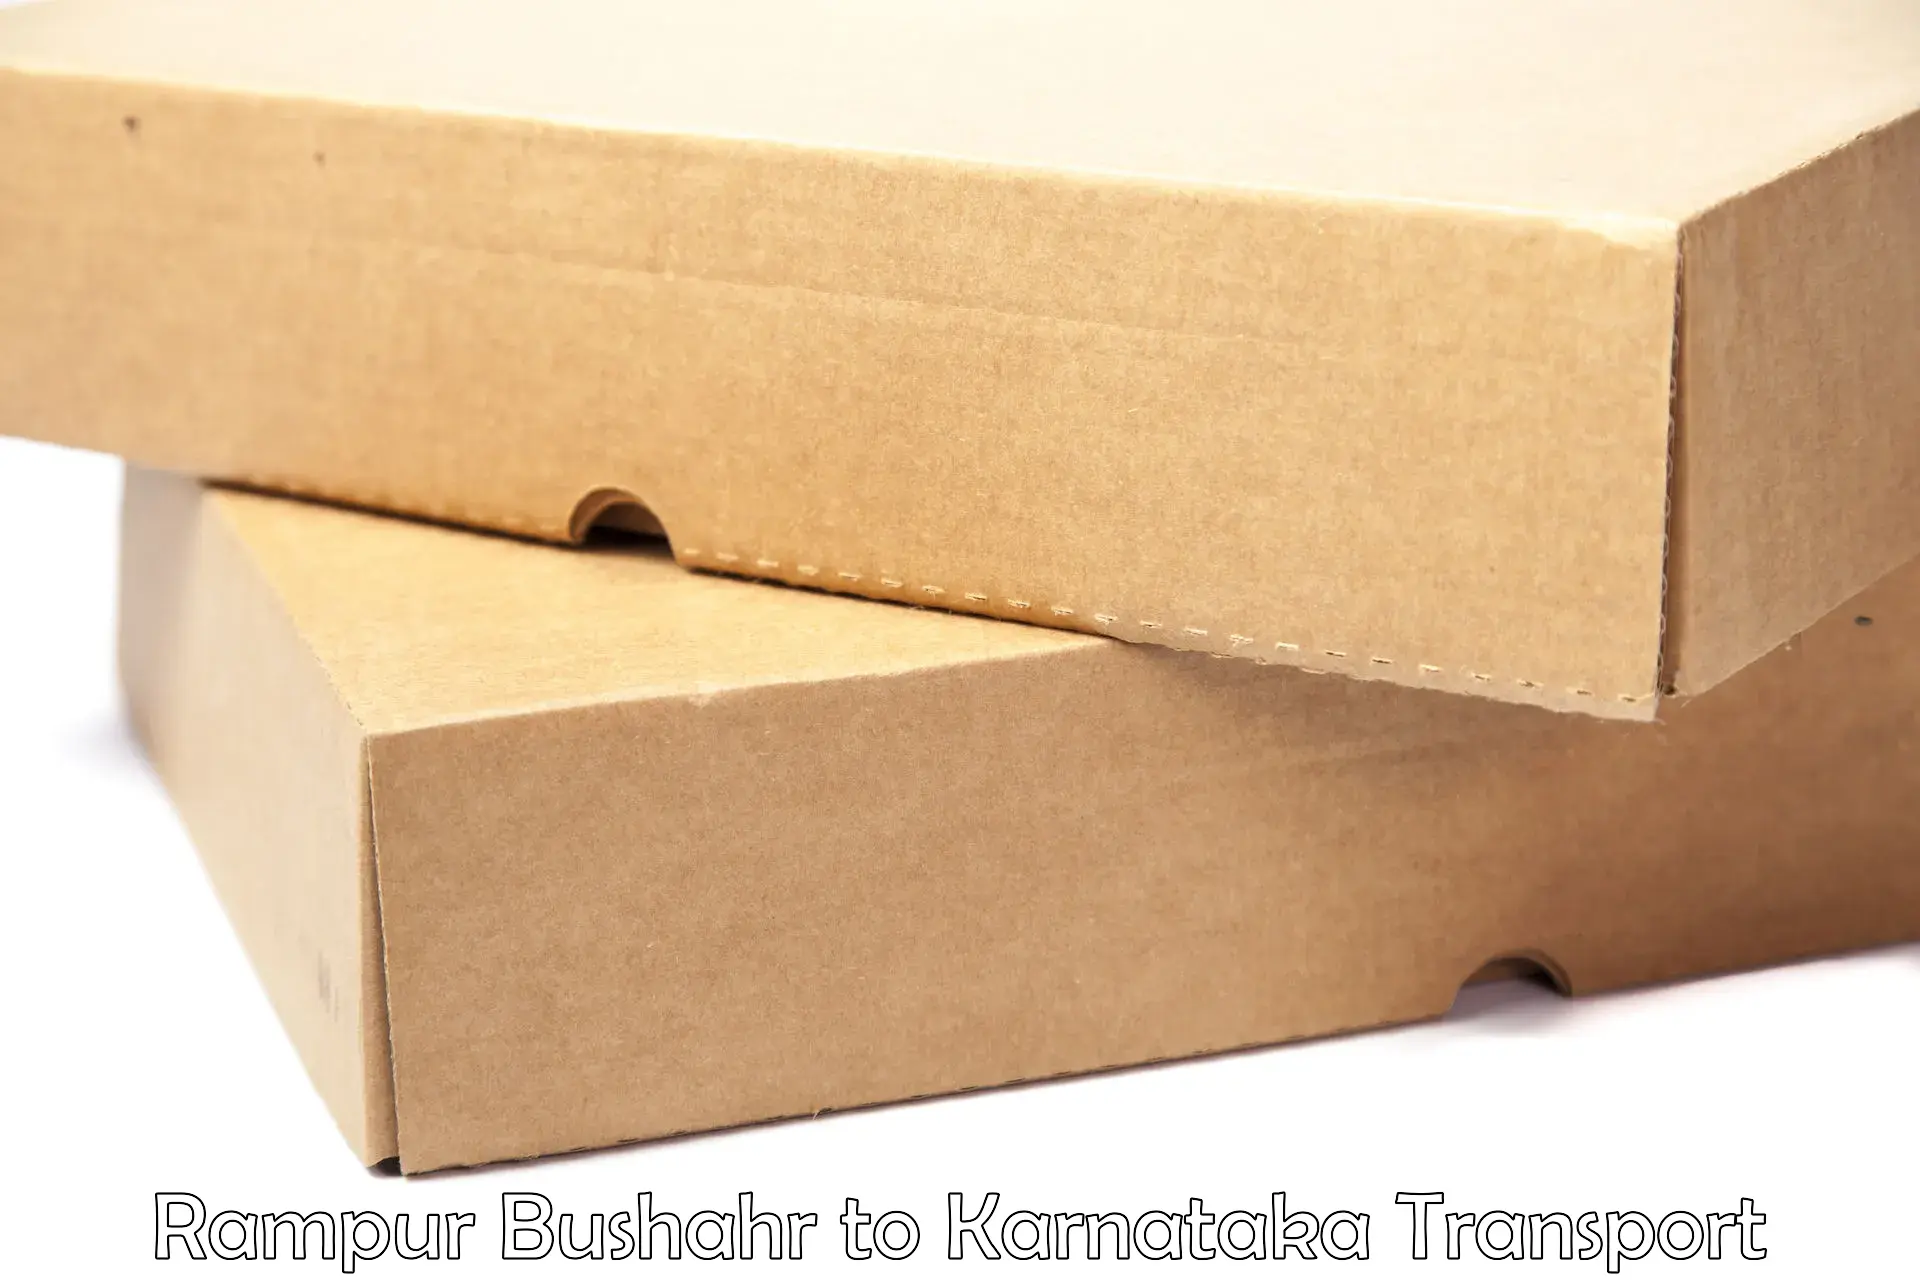 Domestic goods transportation services Rampur Bushahr to Indian Institute of Science Bangalore